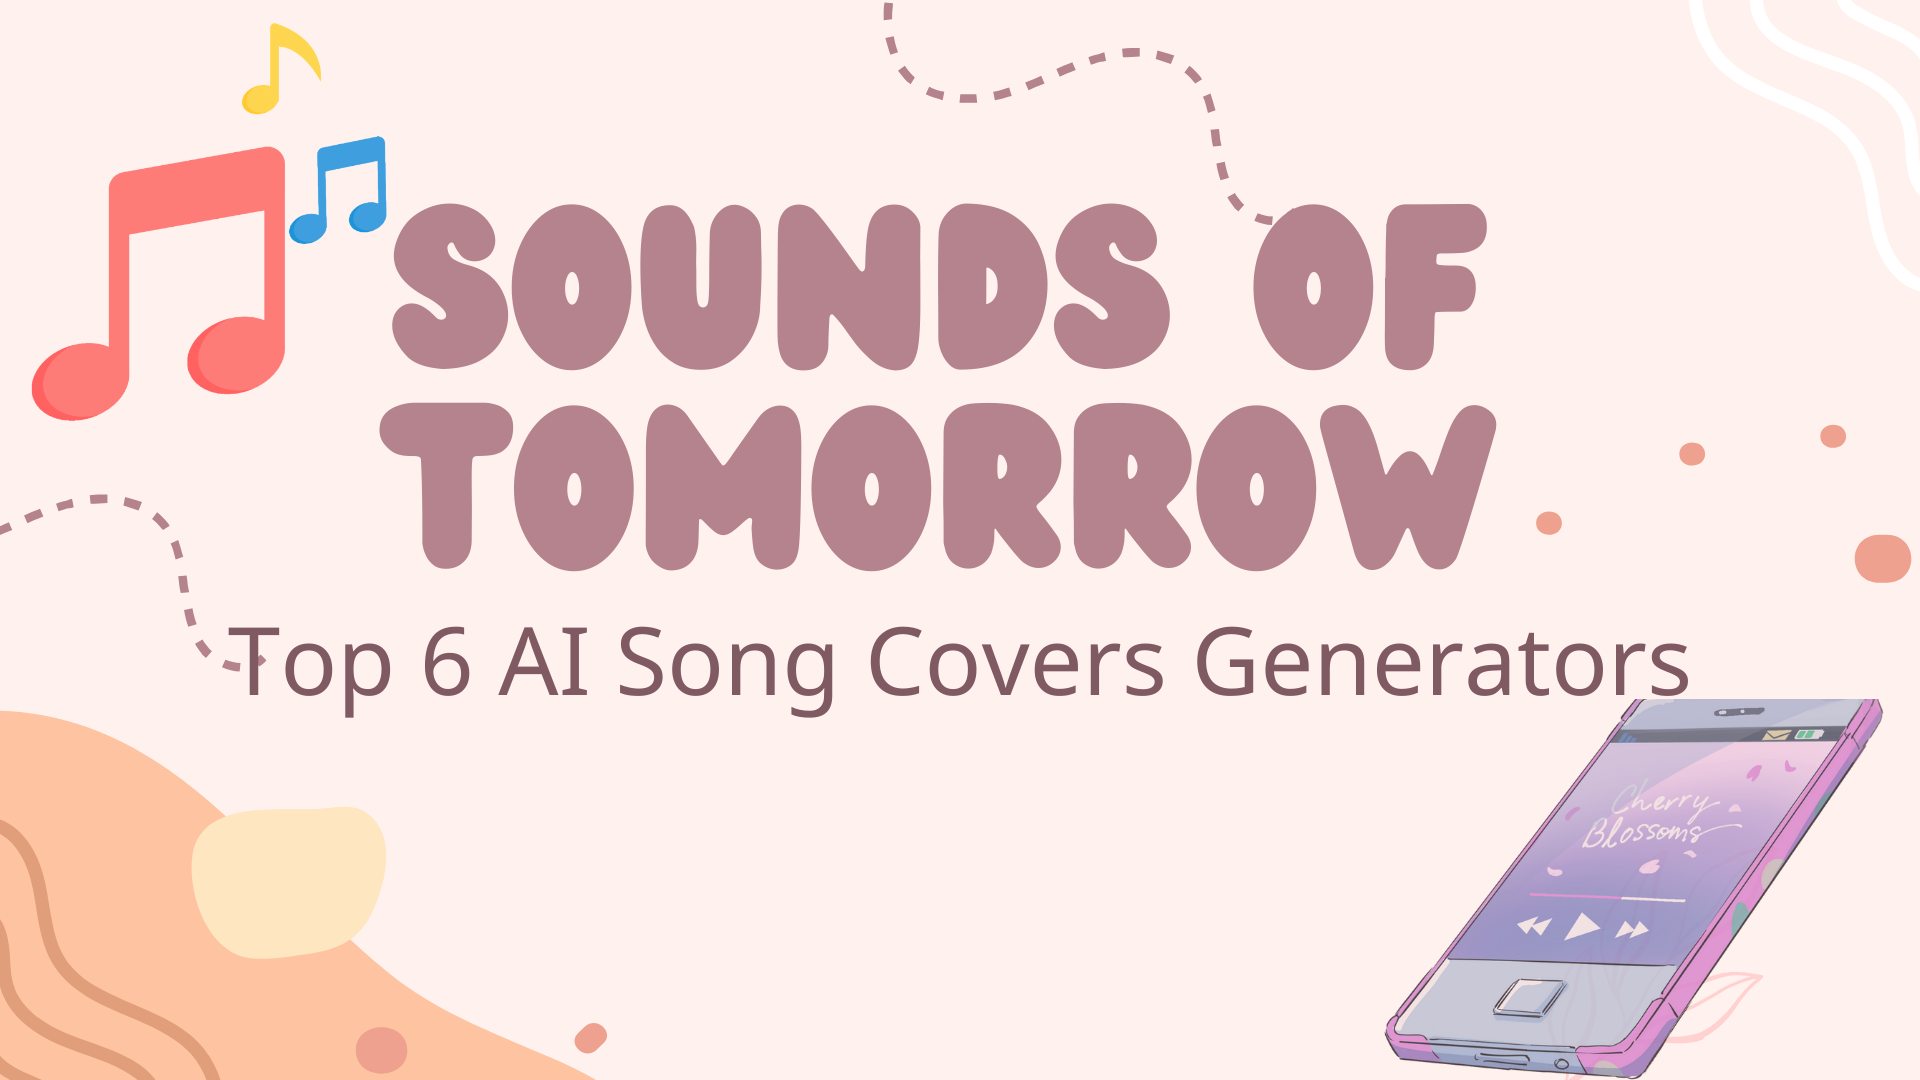 Cover Image for Top 6 AI Song Cover Generator: Sounds of Tomorrow